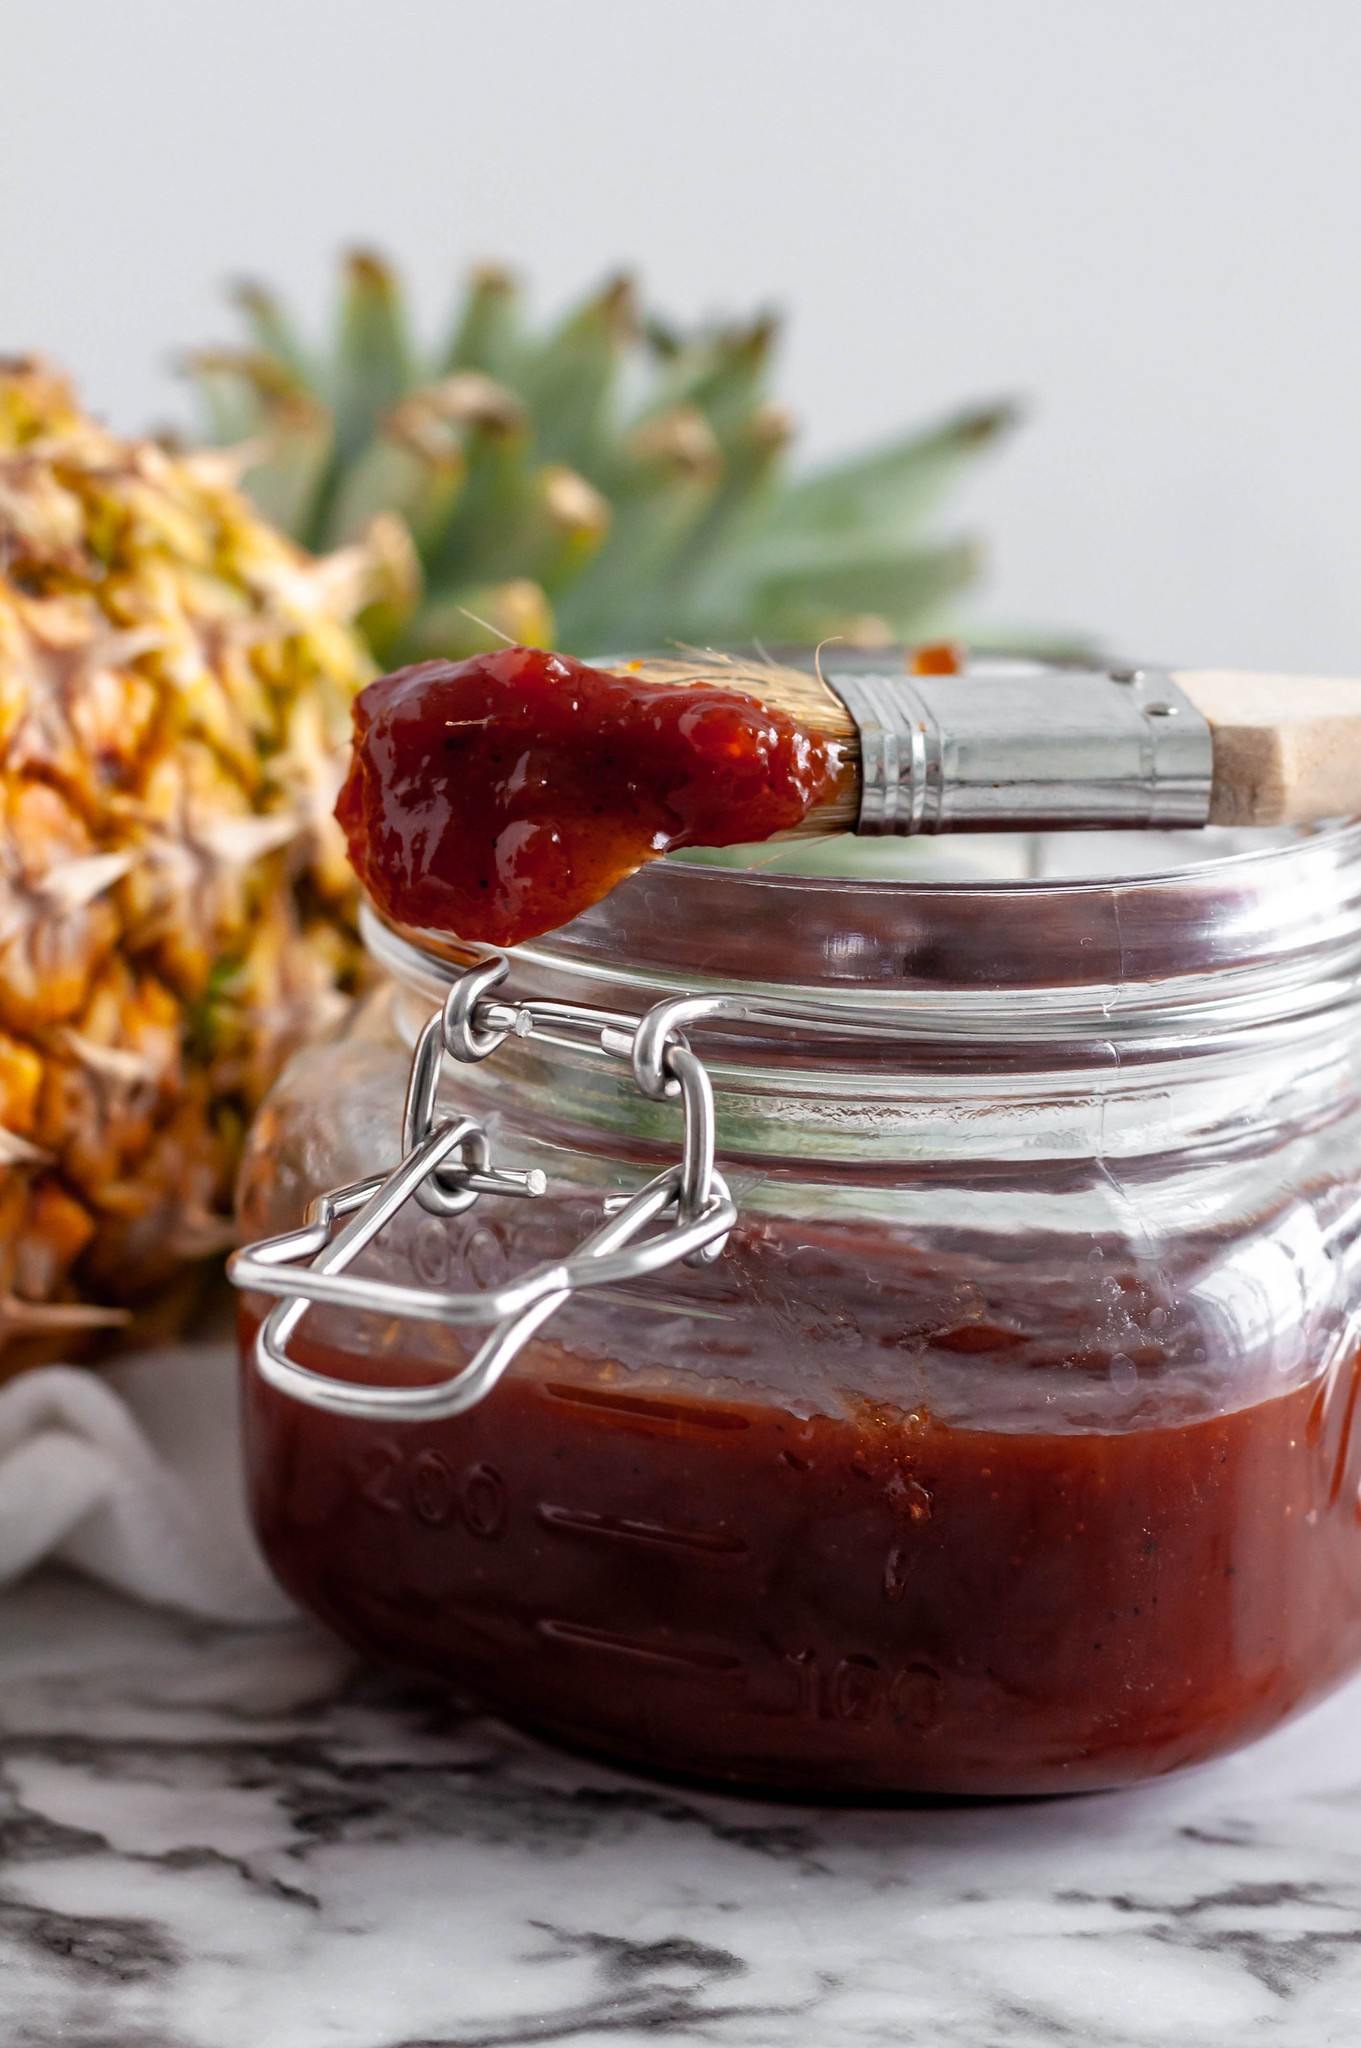 Whip up at batch of Pineapple BBQ Sauce in the instant pot. Sweet, smoky and perfect on everything.